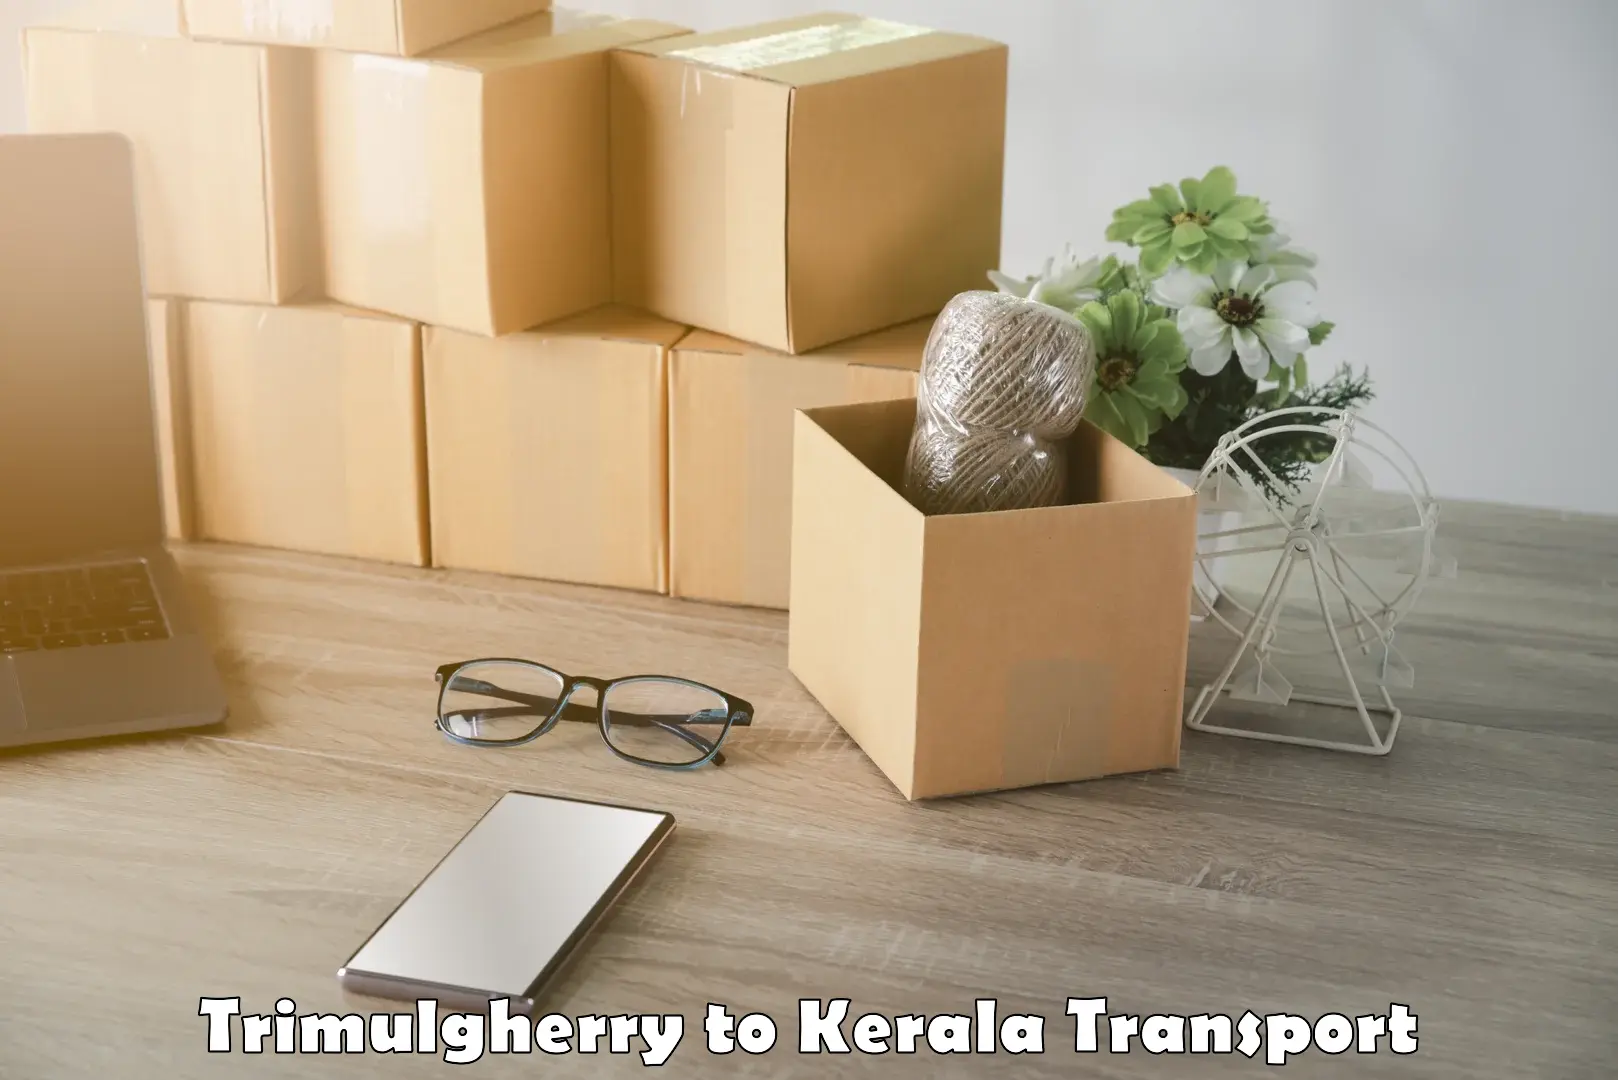 Cargo train transport services Trimulgherry to Ernakulam